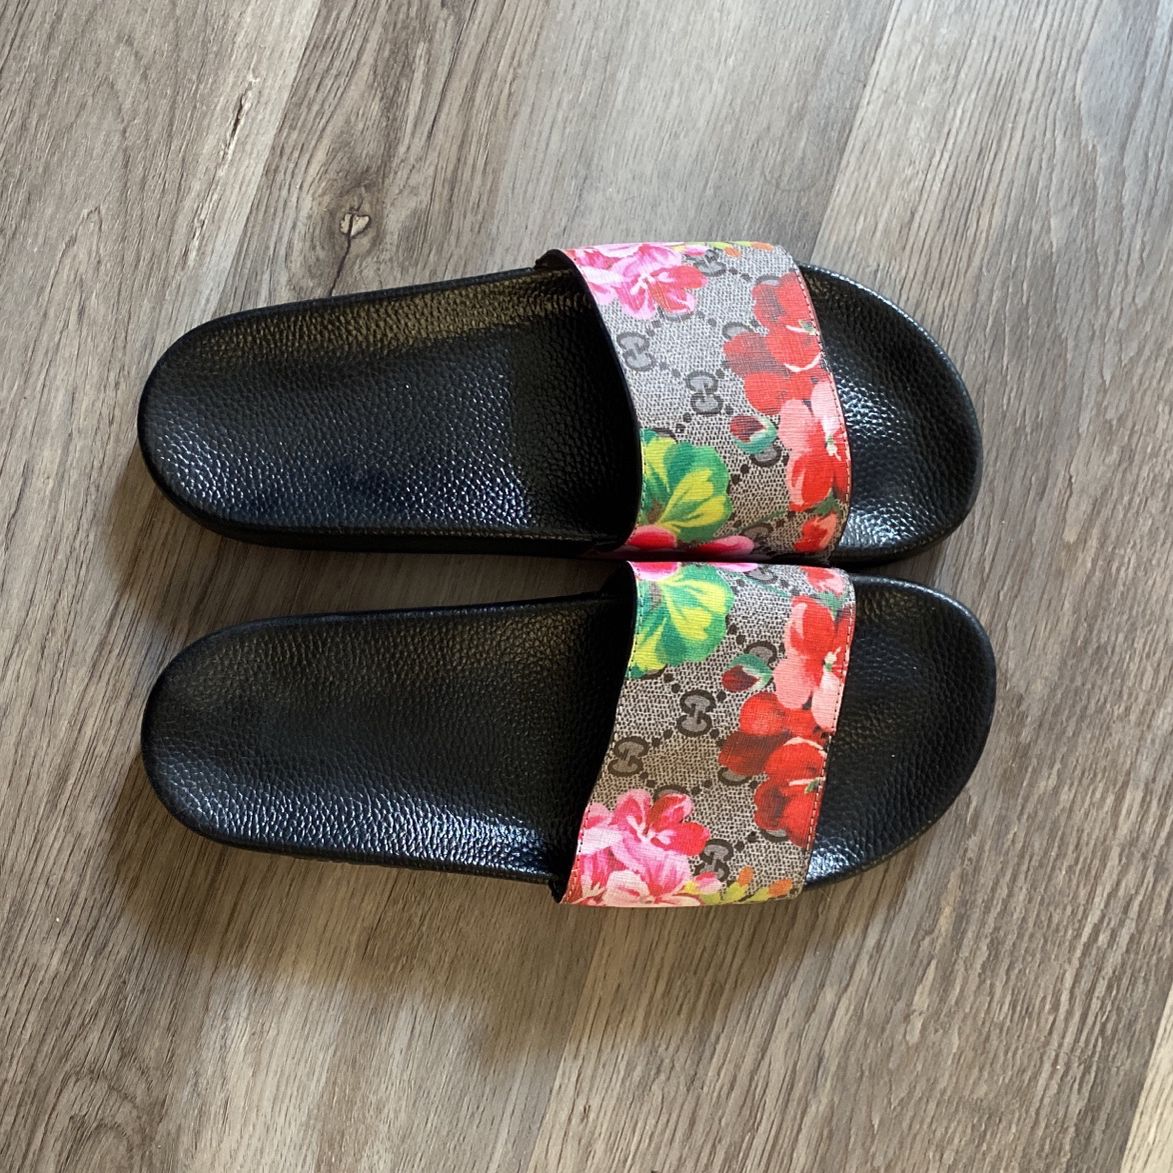 Size 8-9 used Gucci Slides